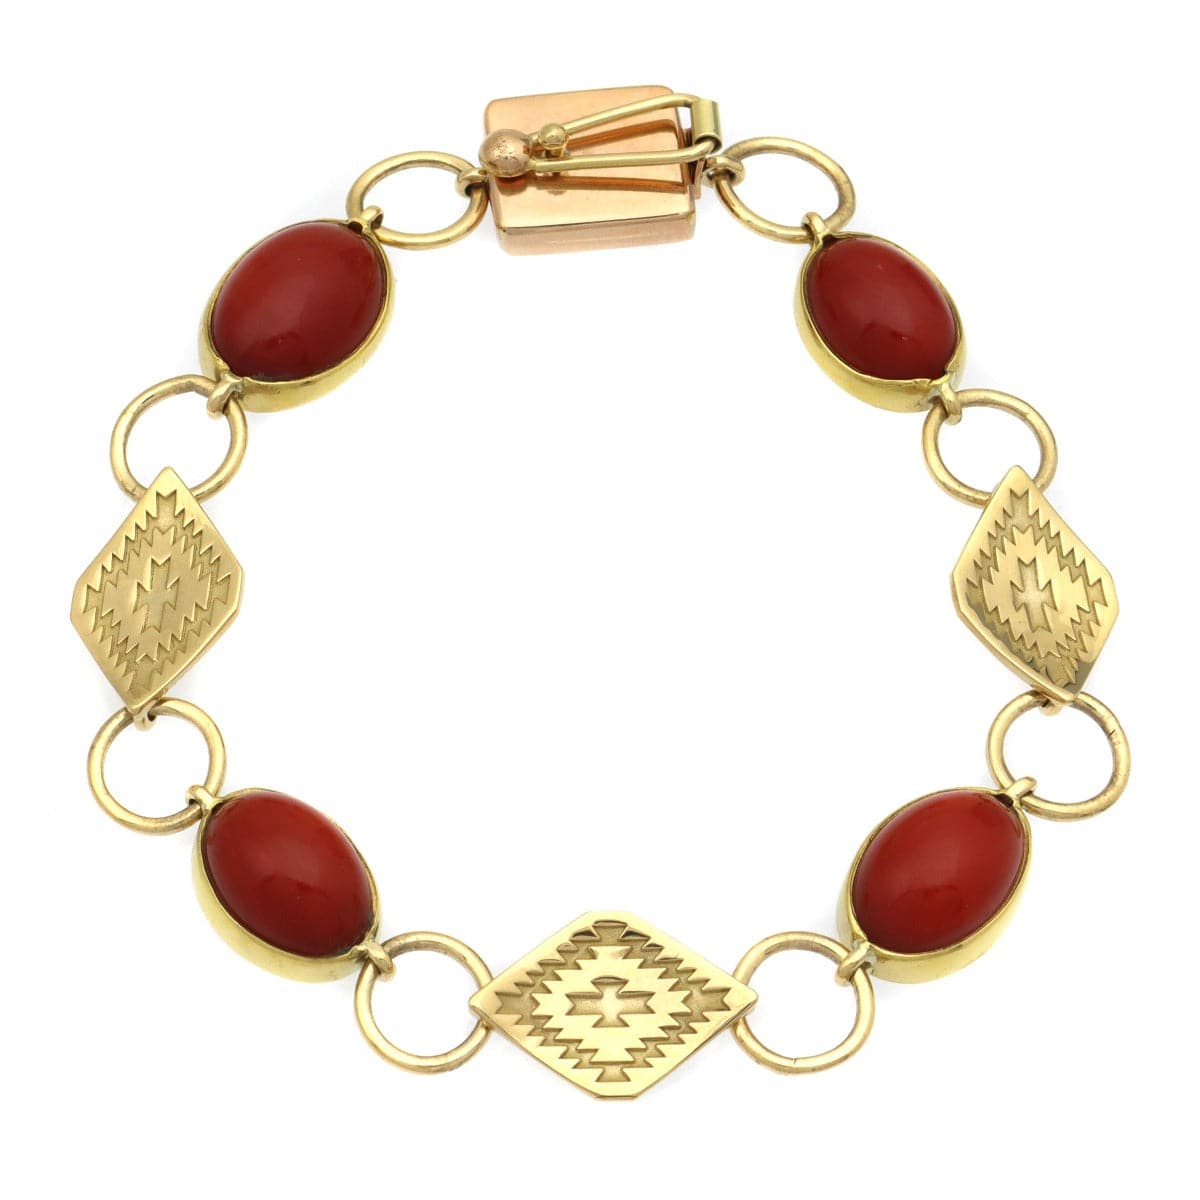 Mark Sublette Collection - Featuring Sam Patania - Coral, 22K Gold, and 18K Gold Link Bracelet, size 7 (J12964)
